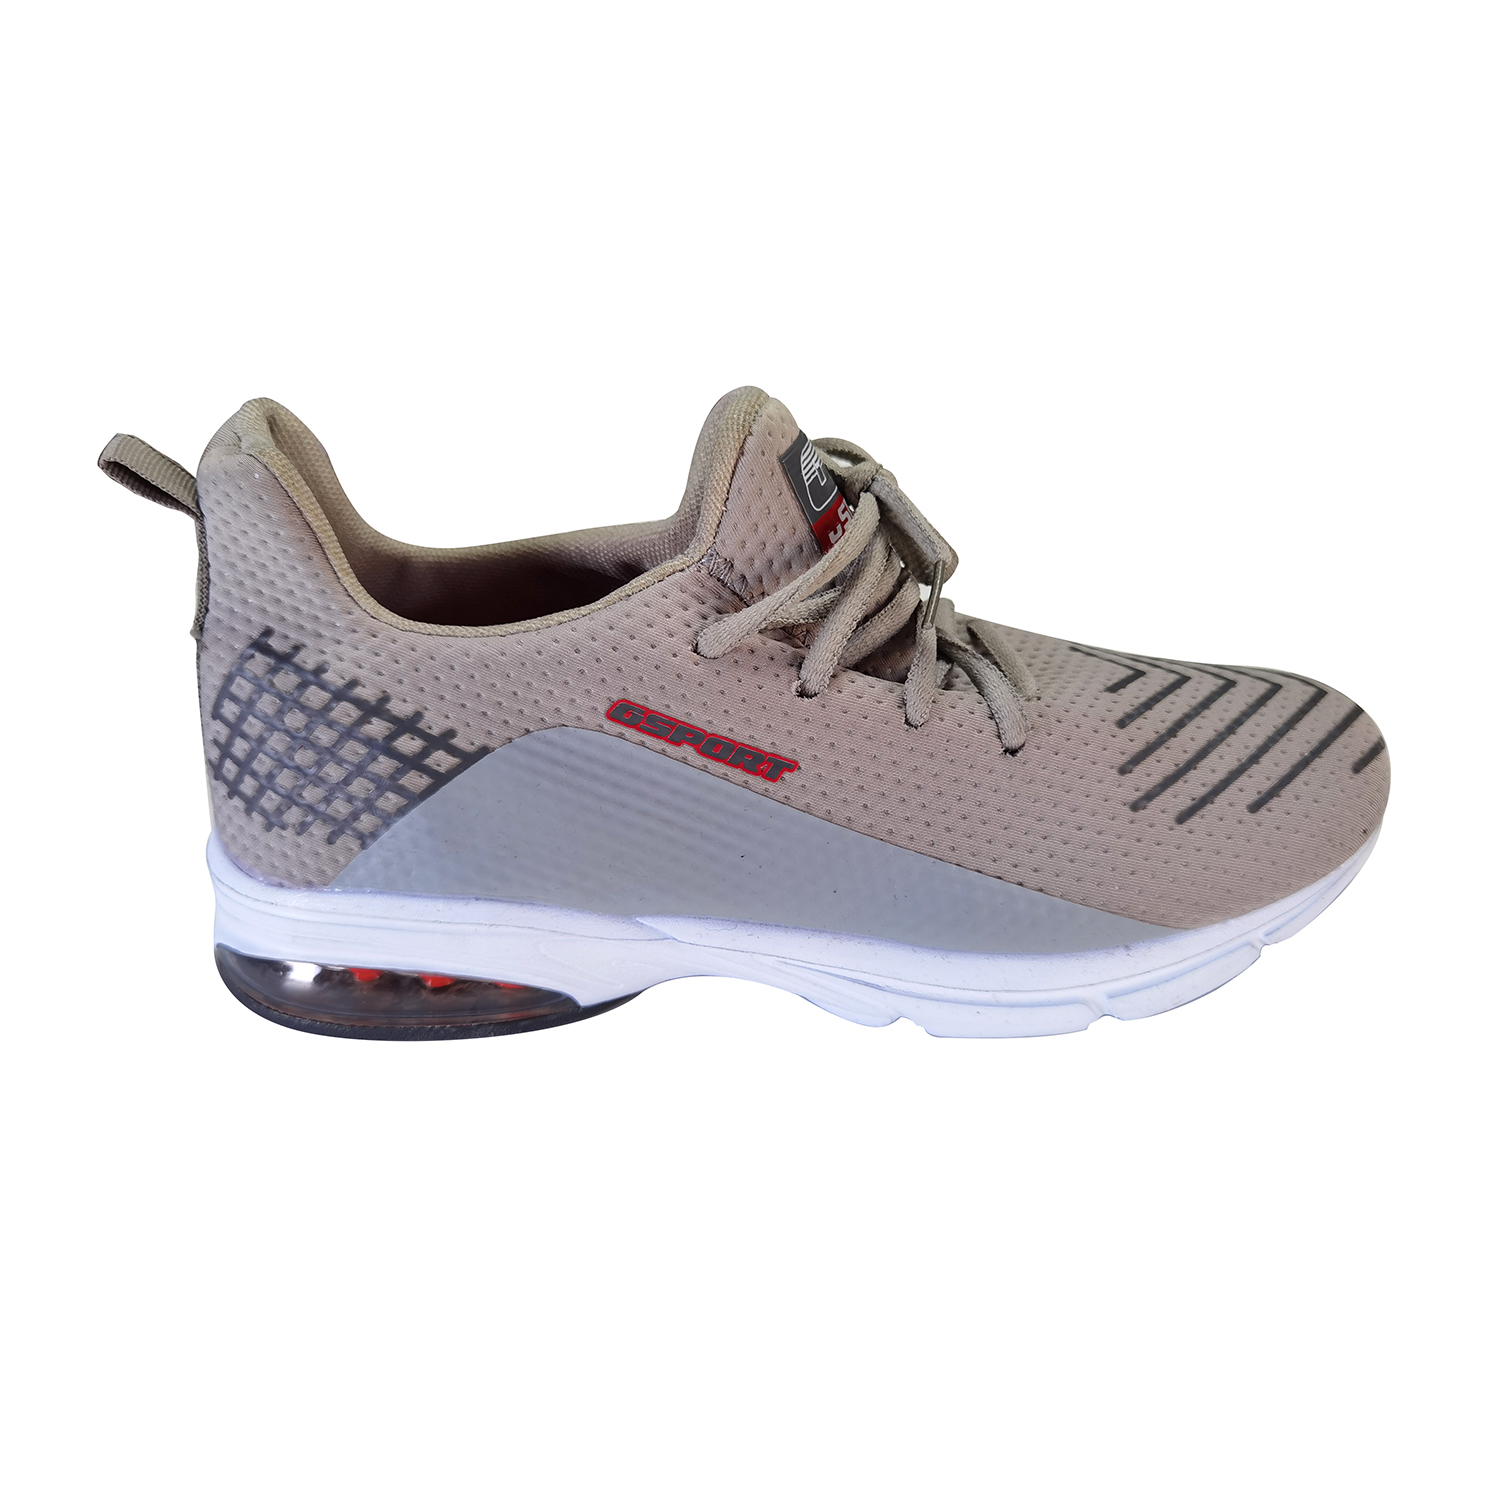 Womens Fashion Sneakers Lightweight Knitted Running Athletic Shoes